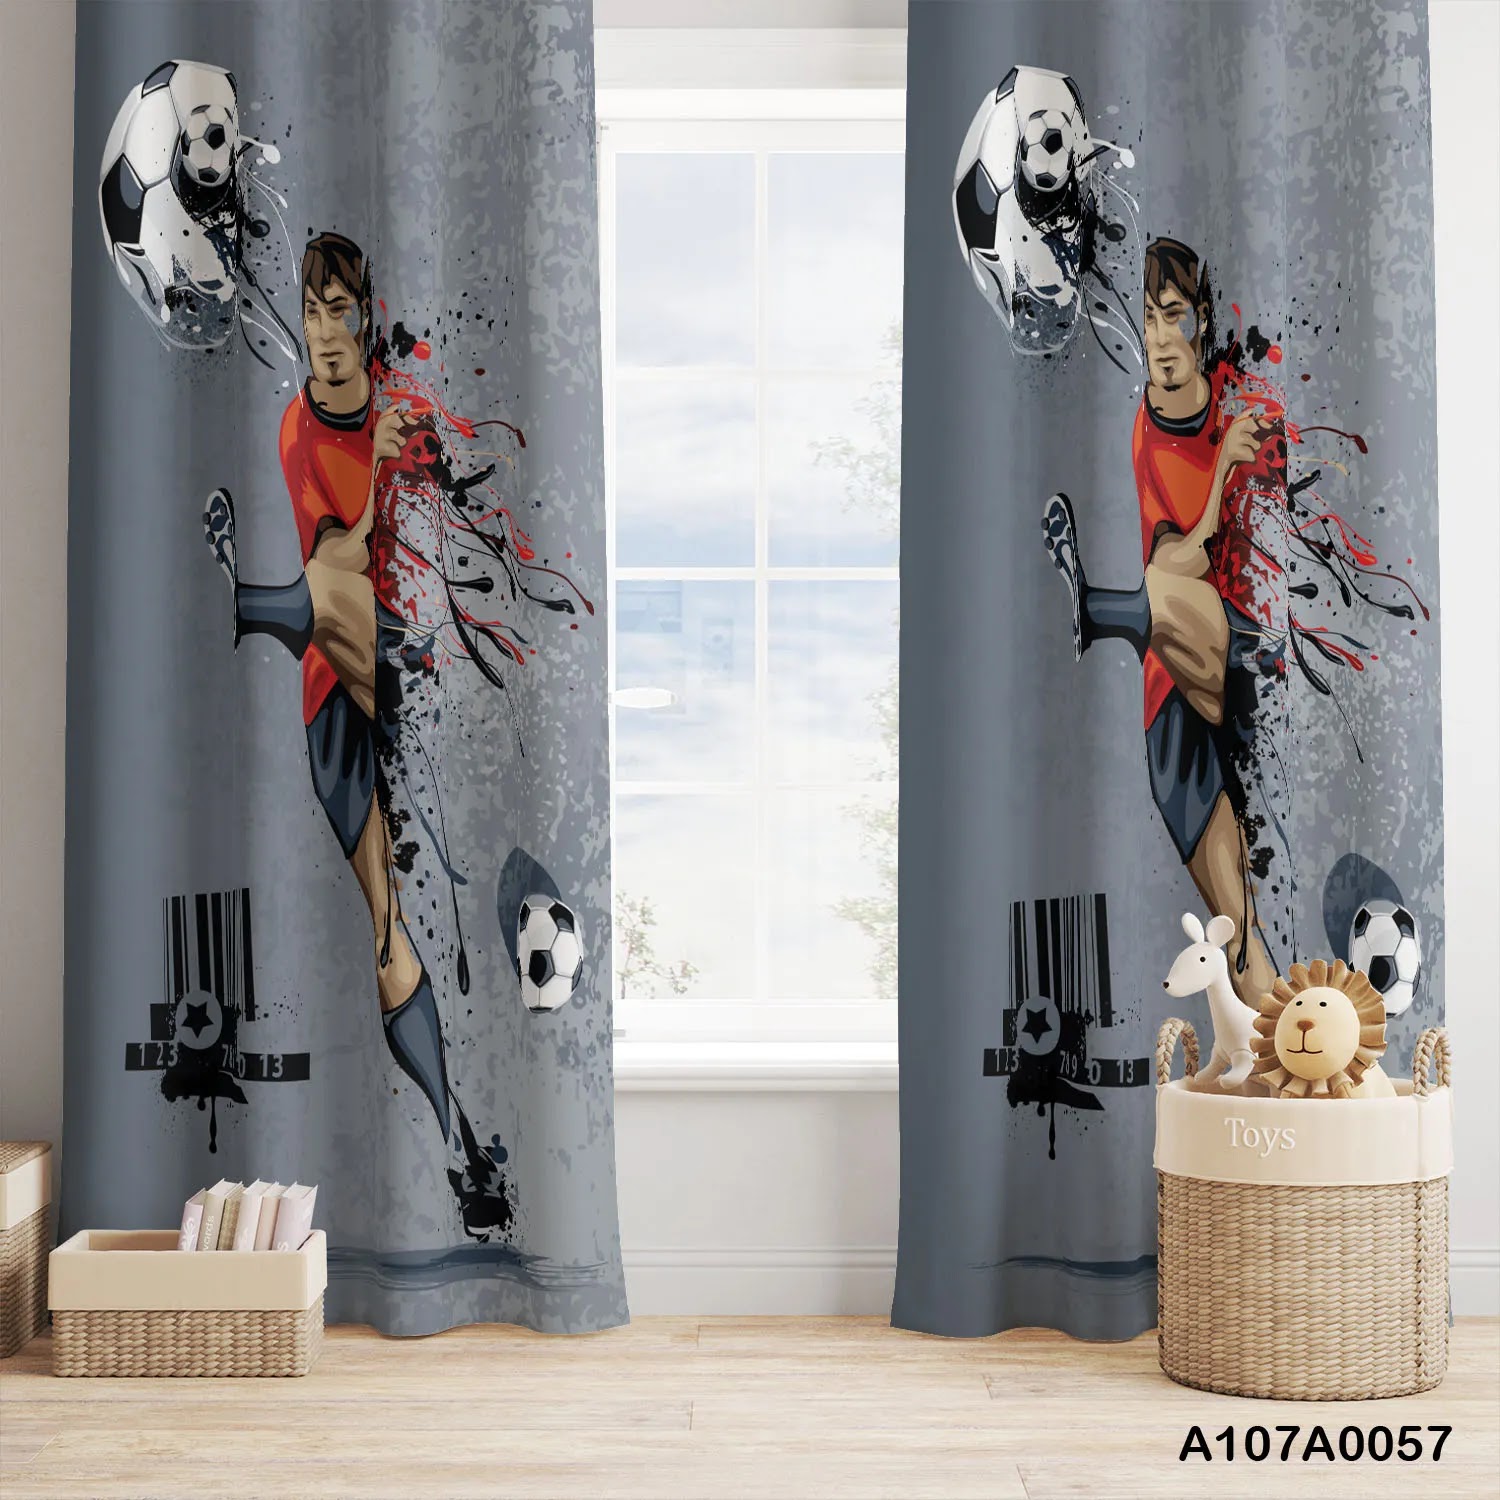 Football player with gray color curtains for boys room